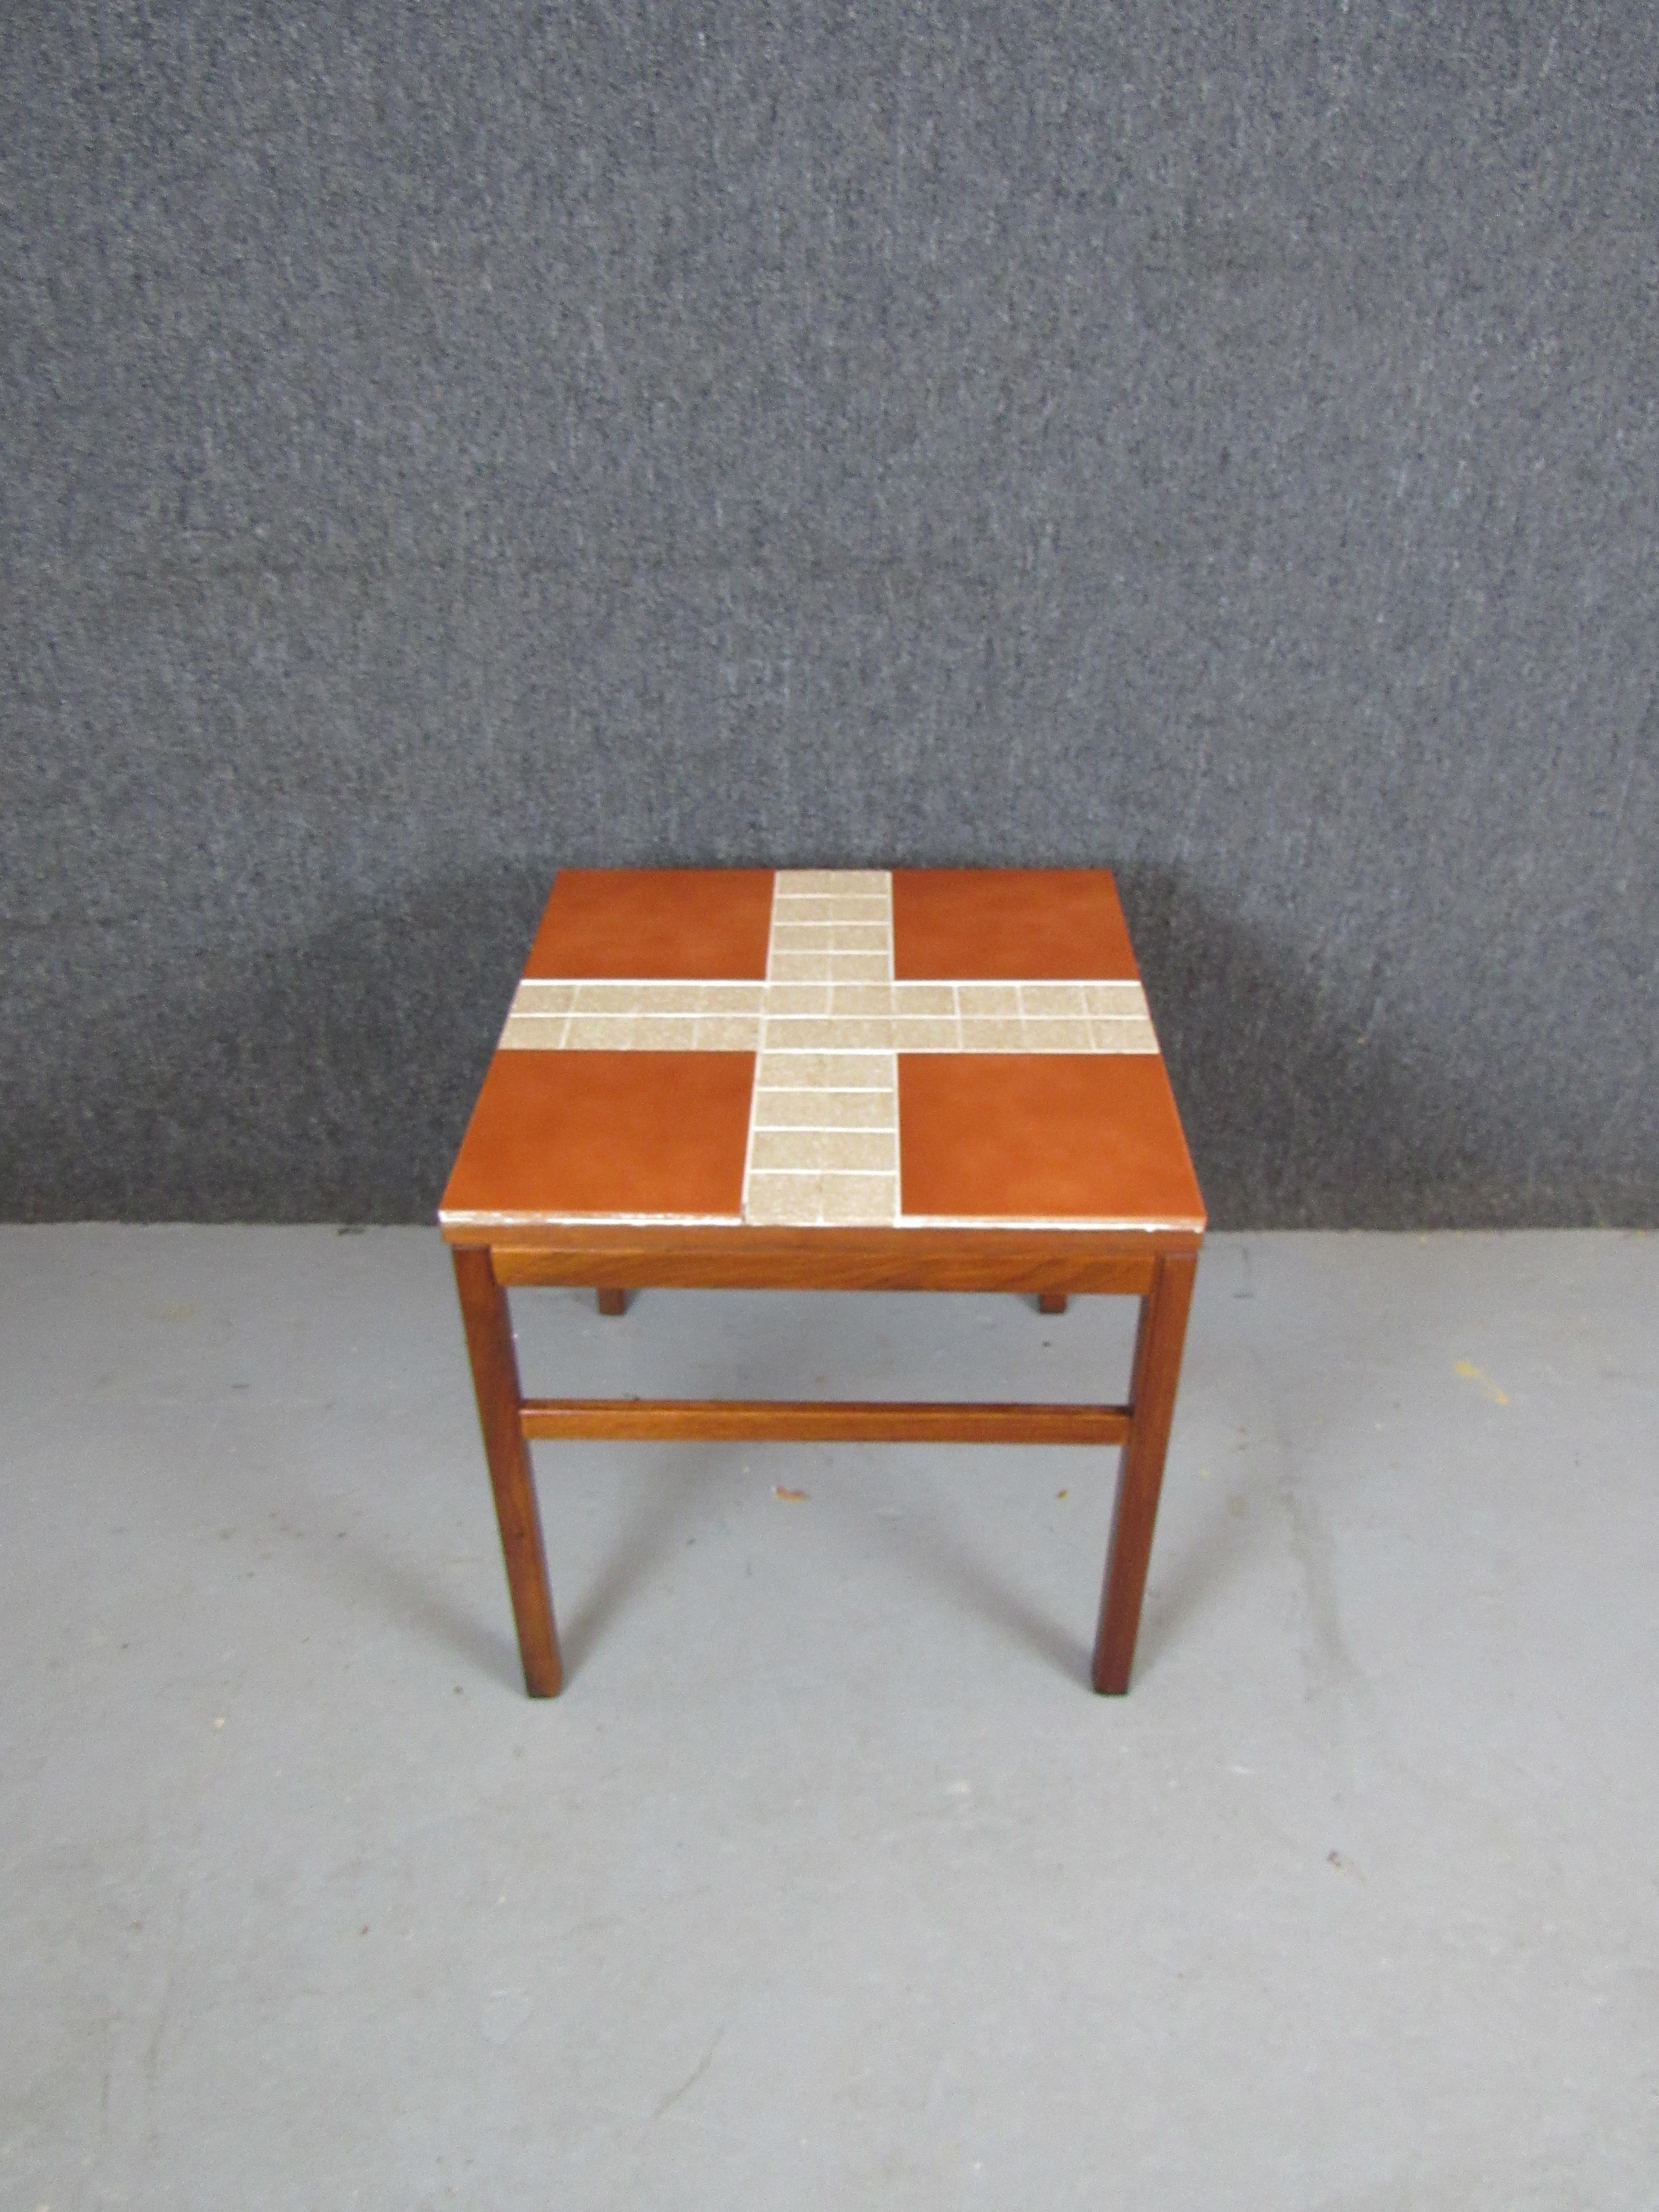 Wonderfully unique side table with a terracotta tiled top on a teak frame. Made by New York's Arbatove and borrowing readily from contemporary mid-century Danish design, this petite table is perfect for a myriad of uses, whether in the home or